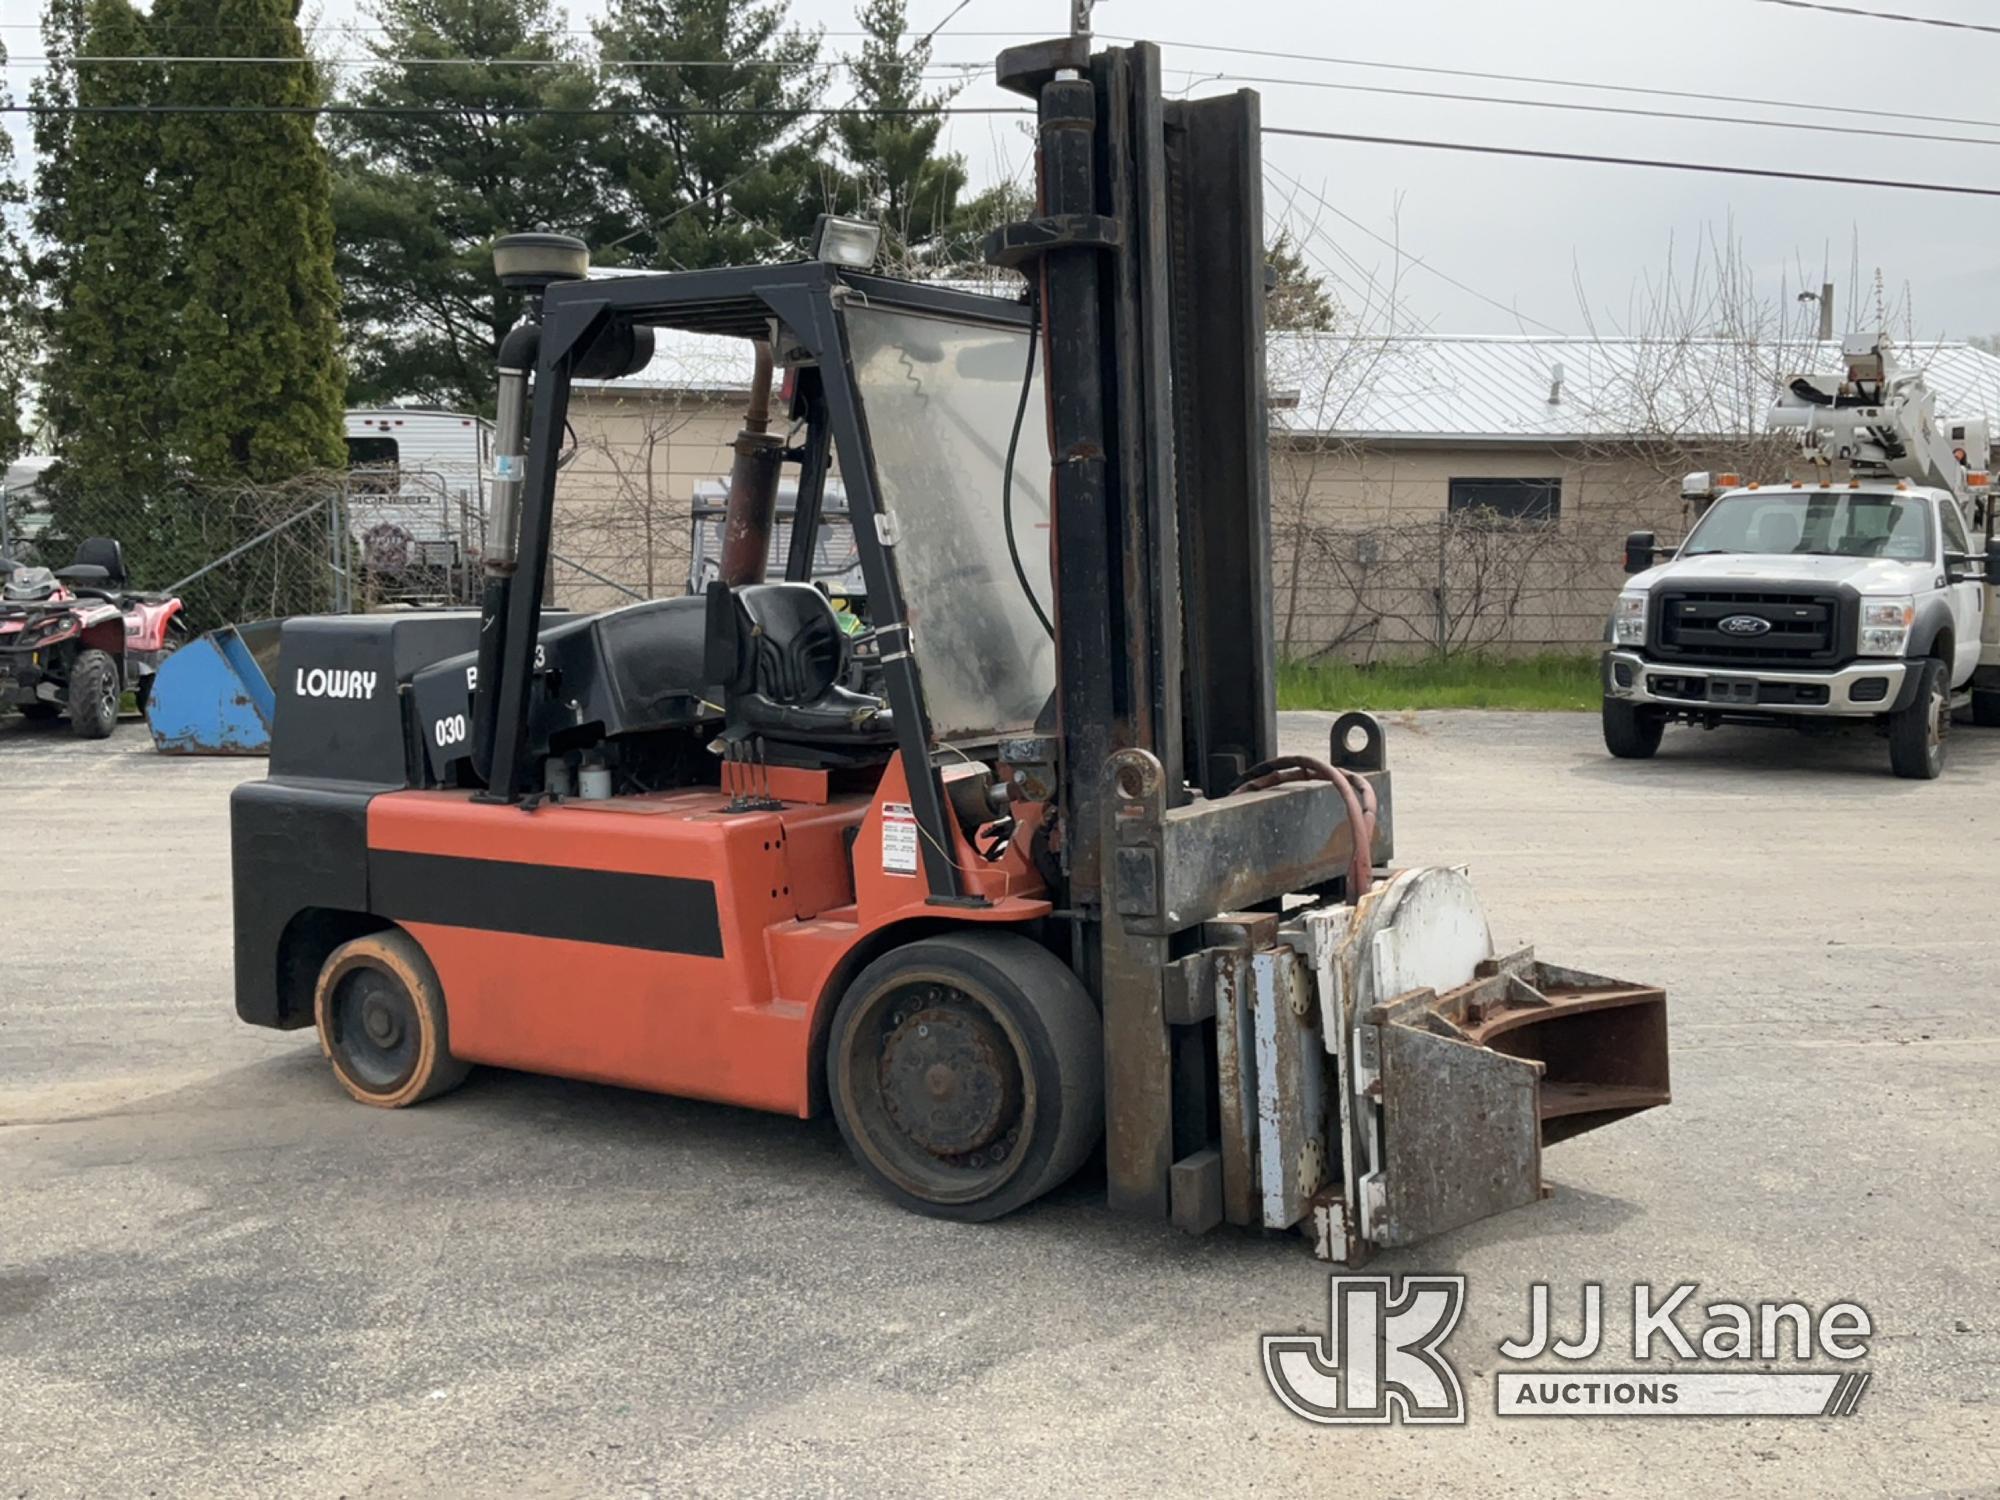 (South Beloit, IL) 2013 Lowry L180XDS Cushion Tired Forklift Runs, Moves, Operates) (Battery Needs t